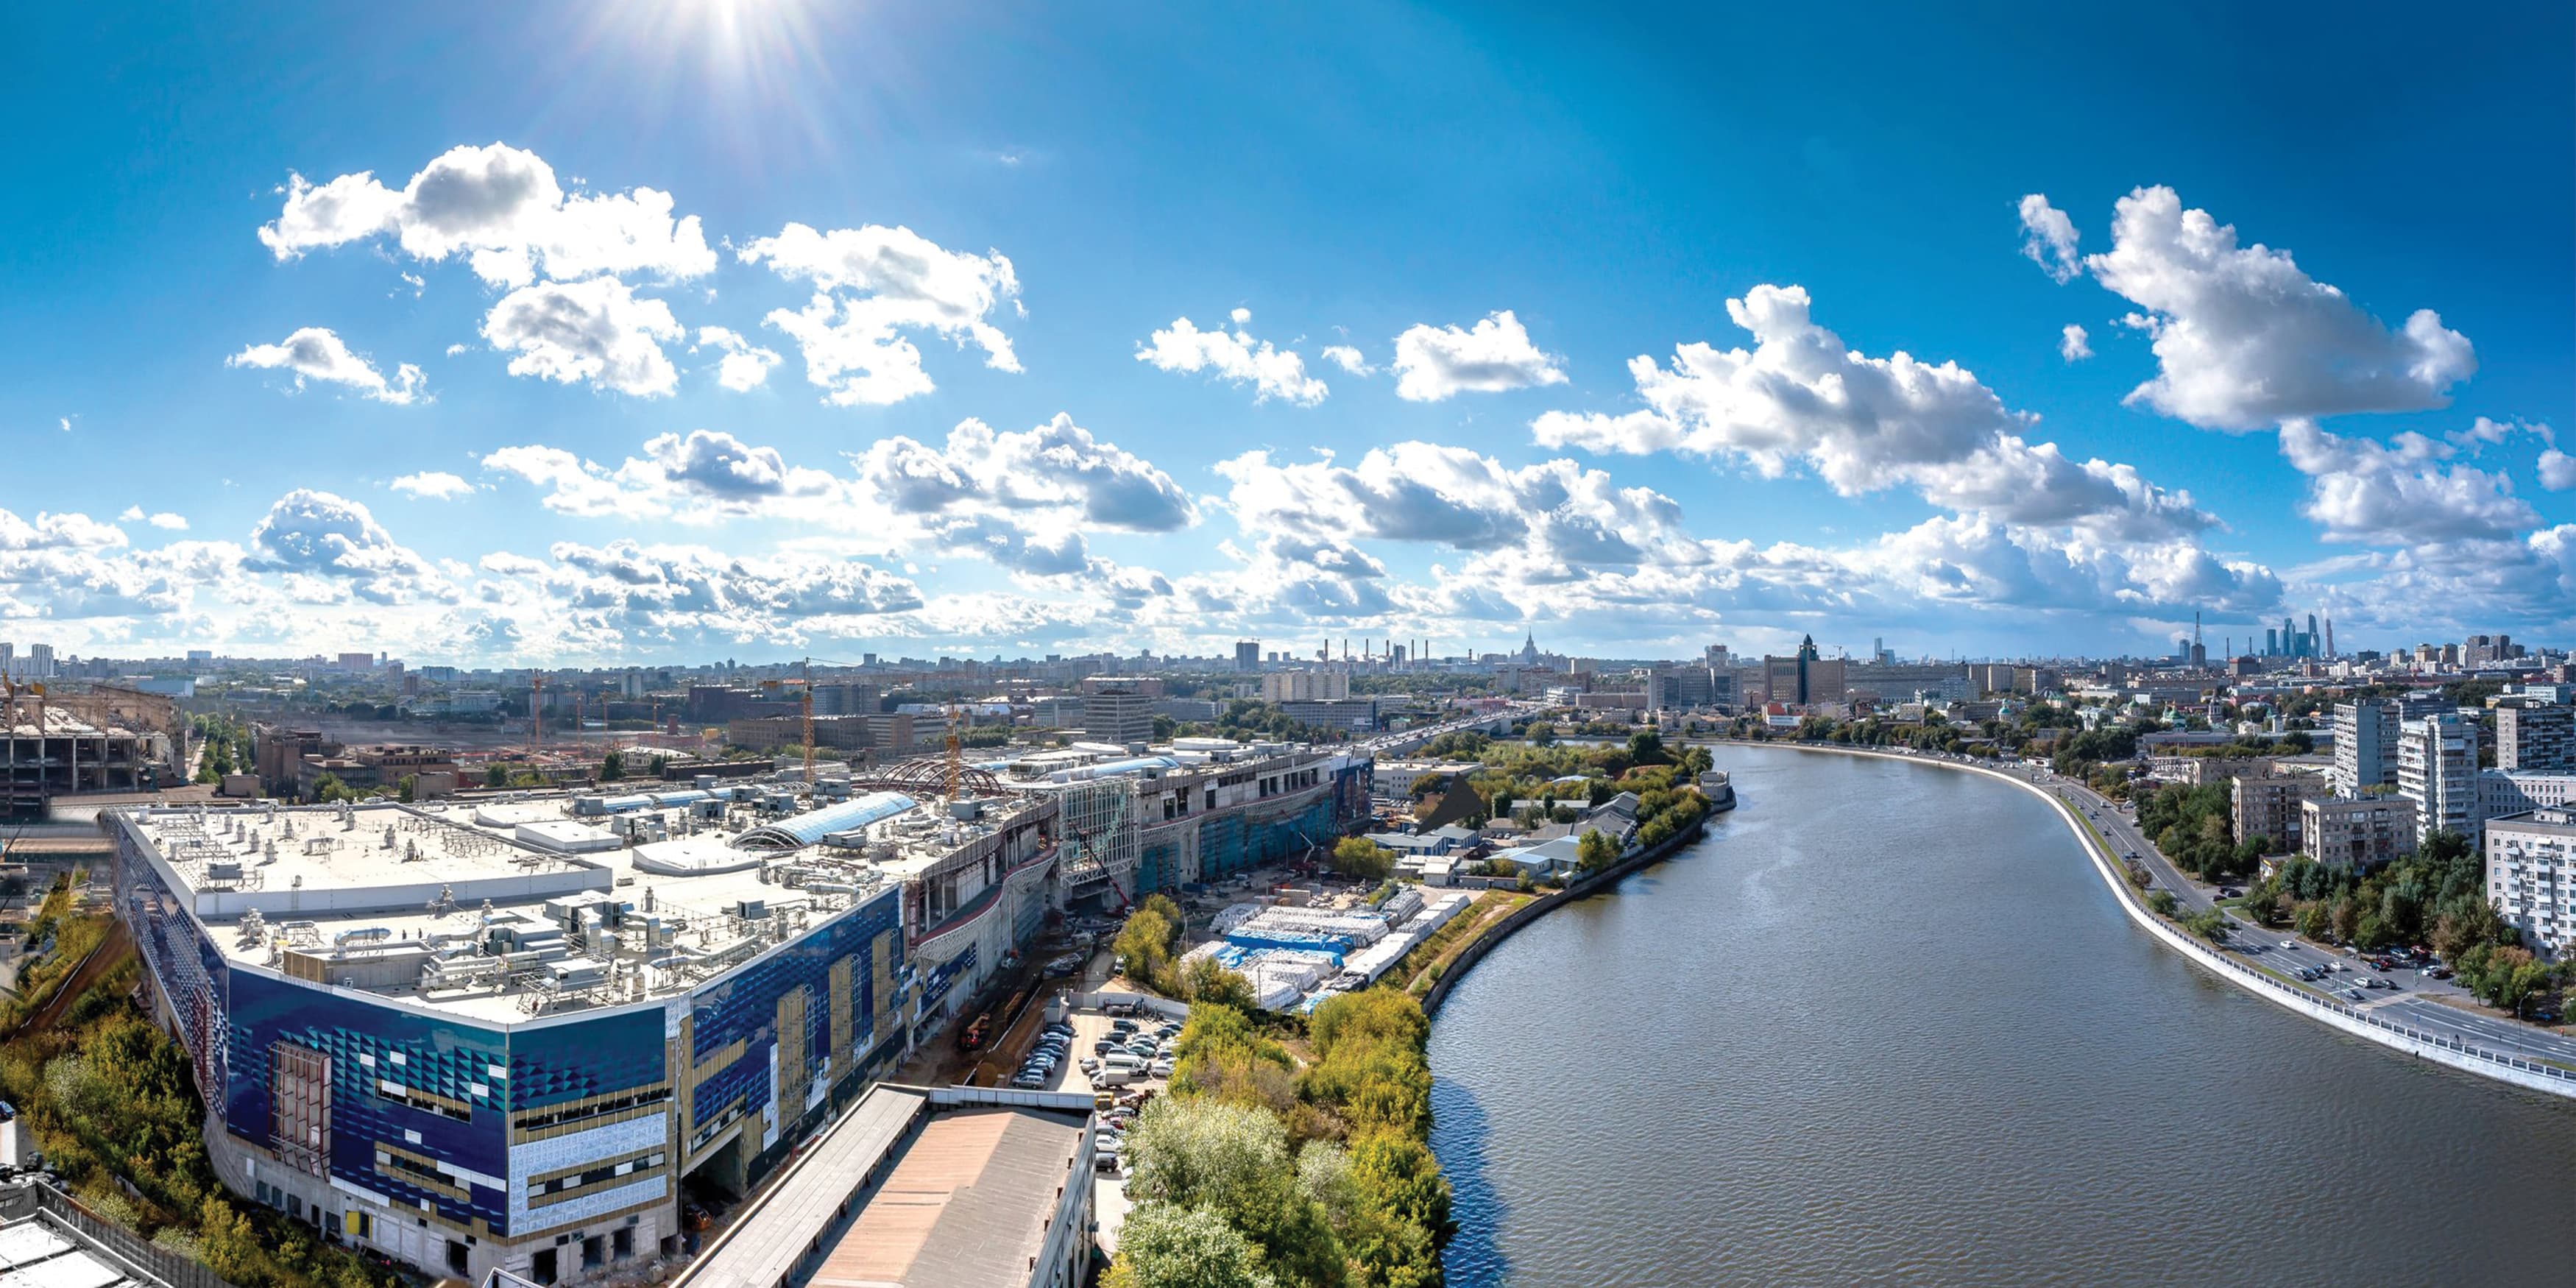 Aerial View of Moscow Riviera retail destination